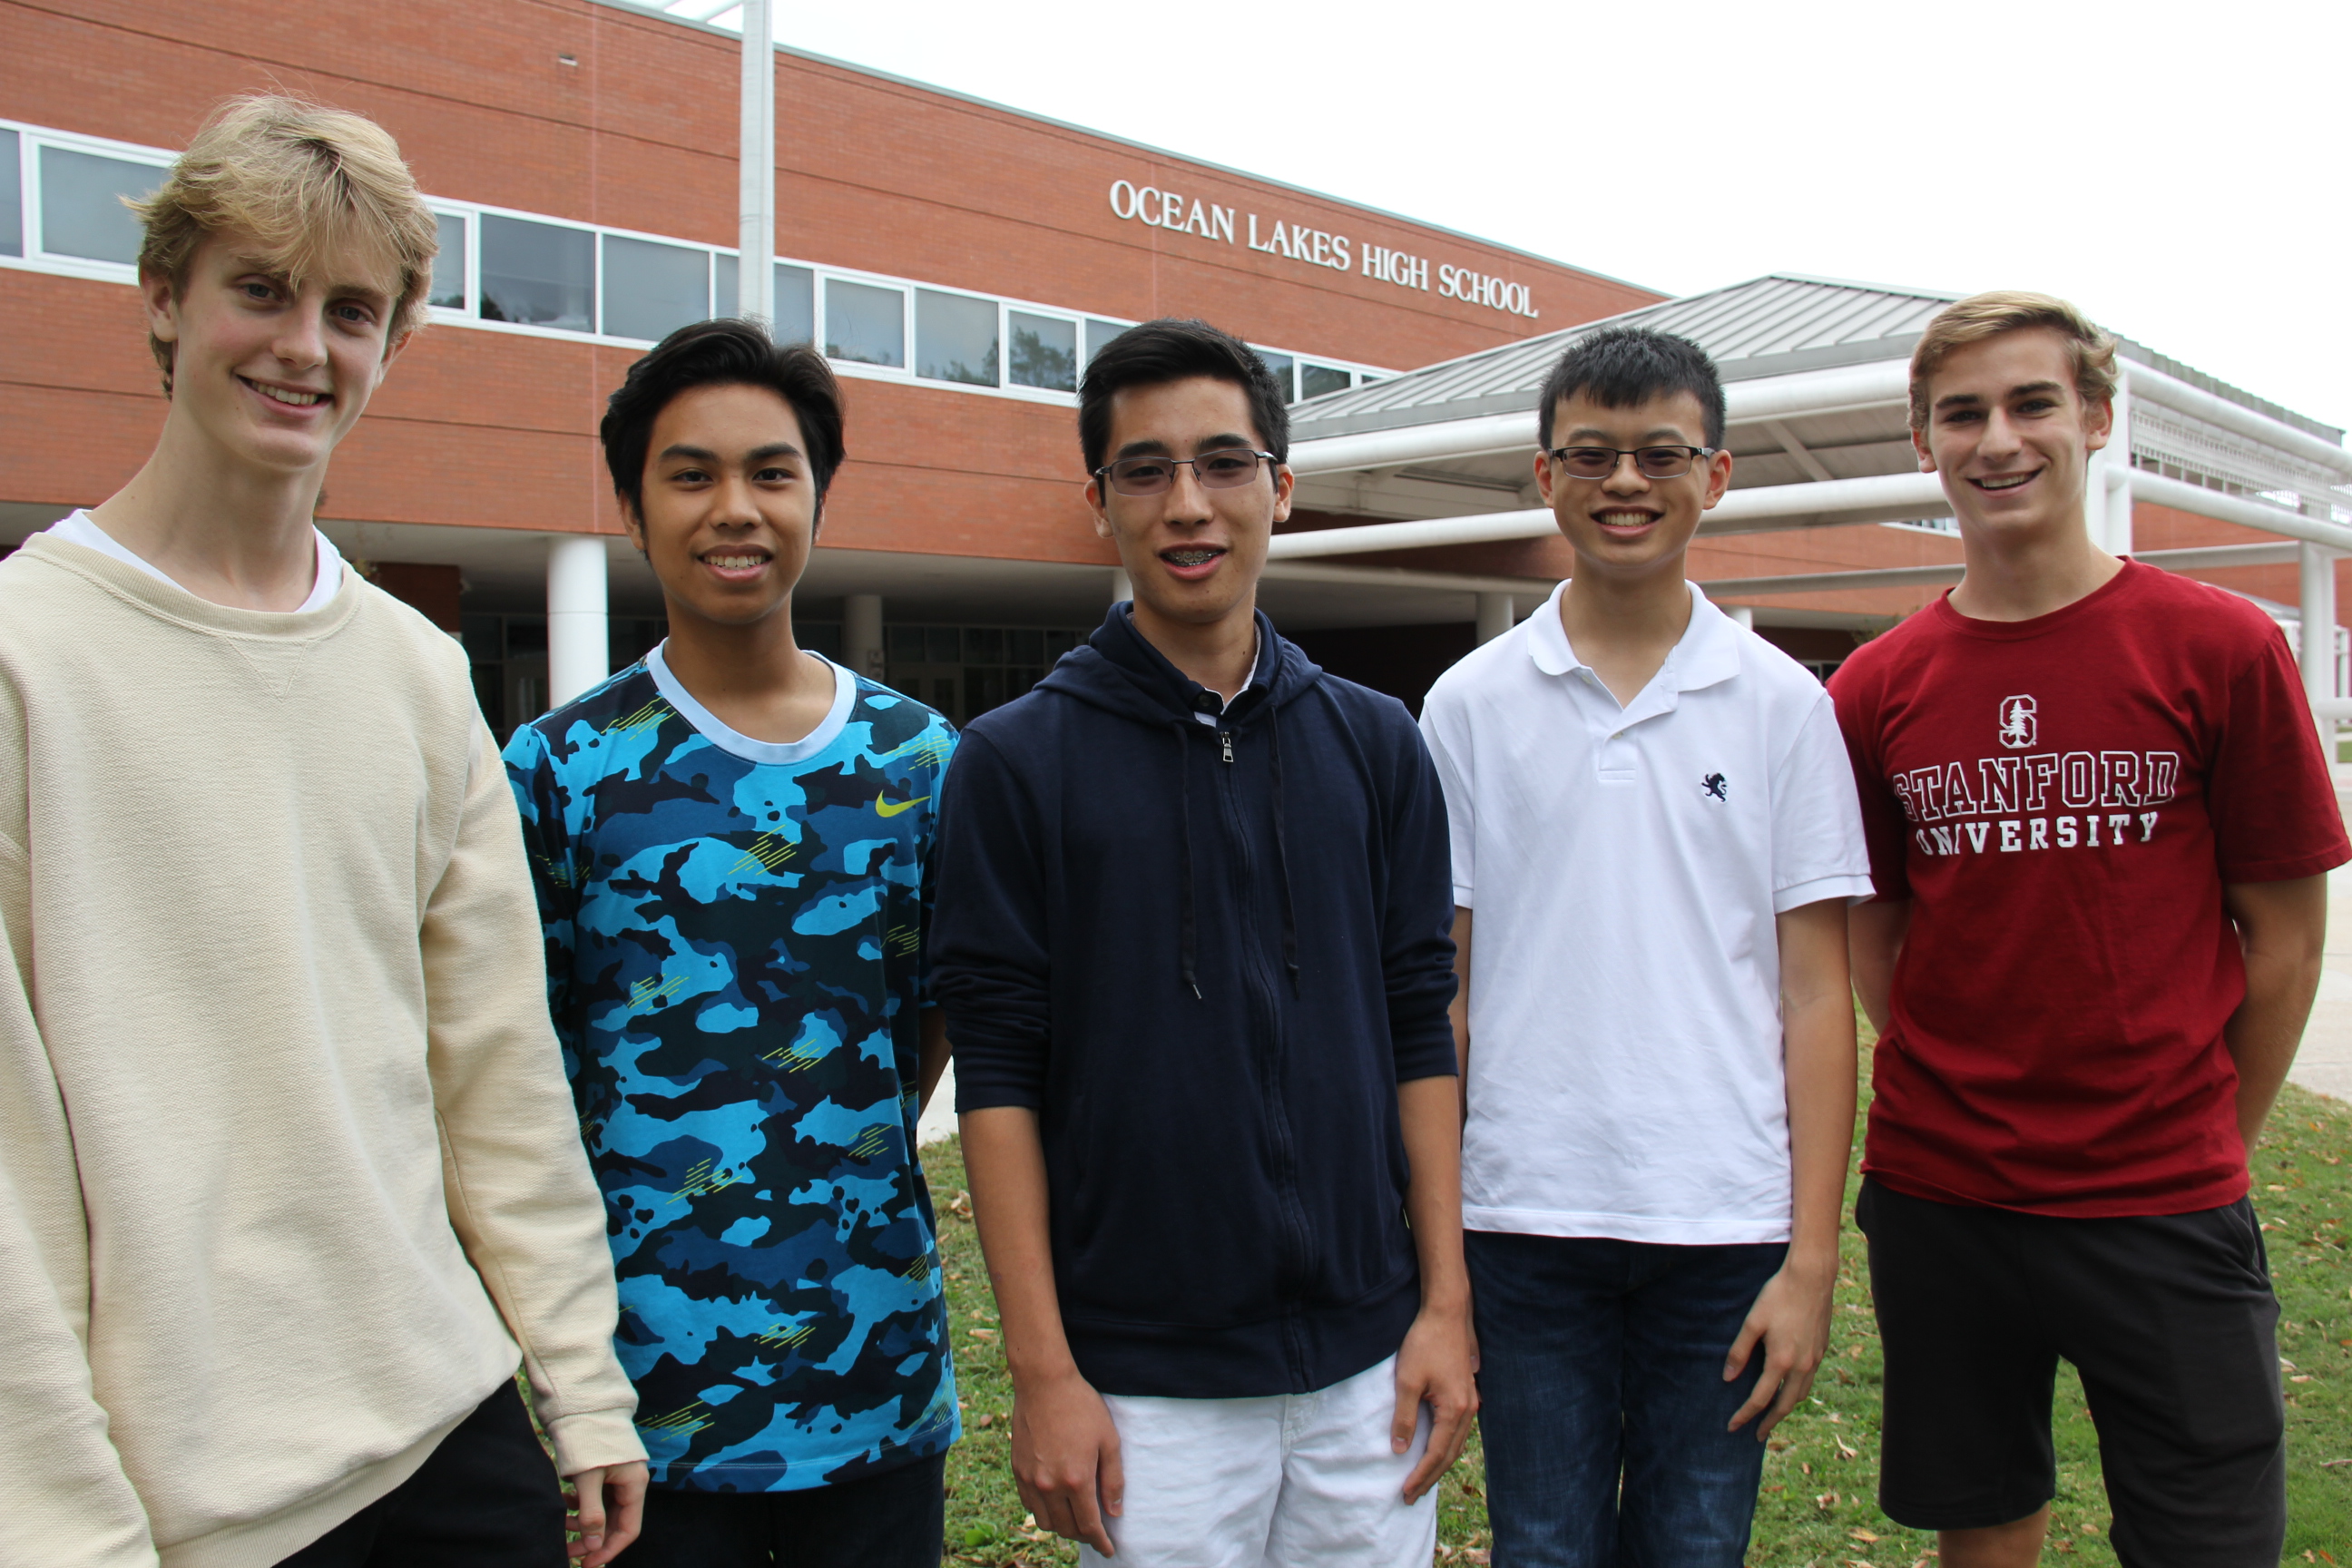 Ocean Lakes High School students again achieve perfect score on ACT